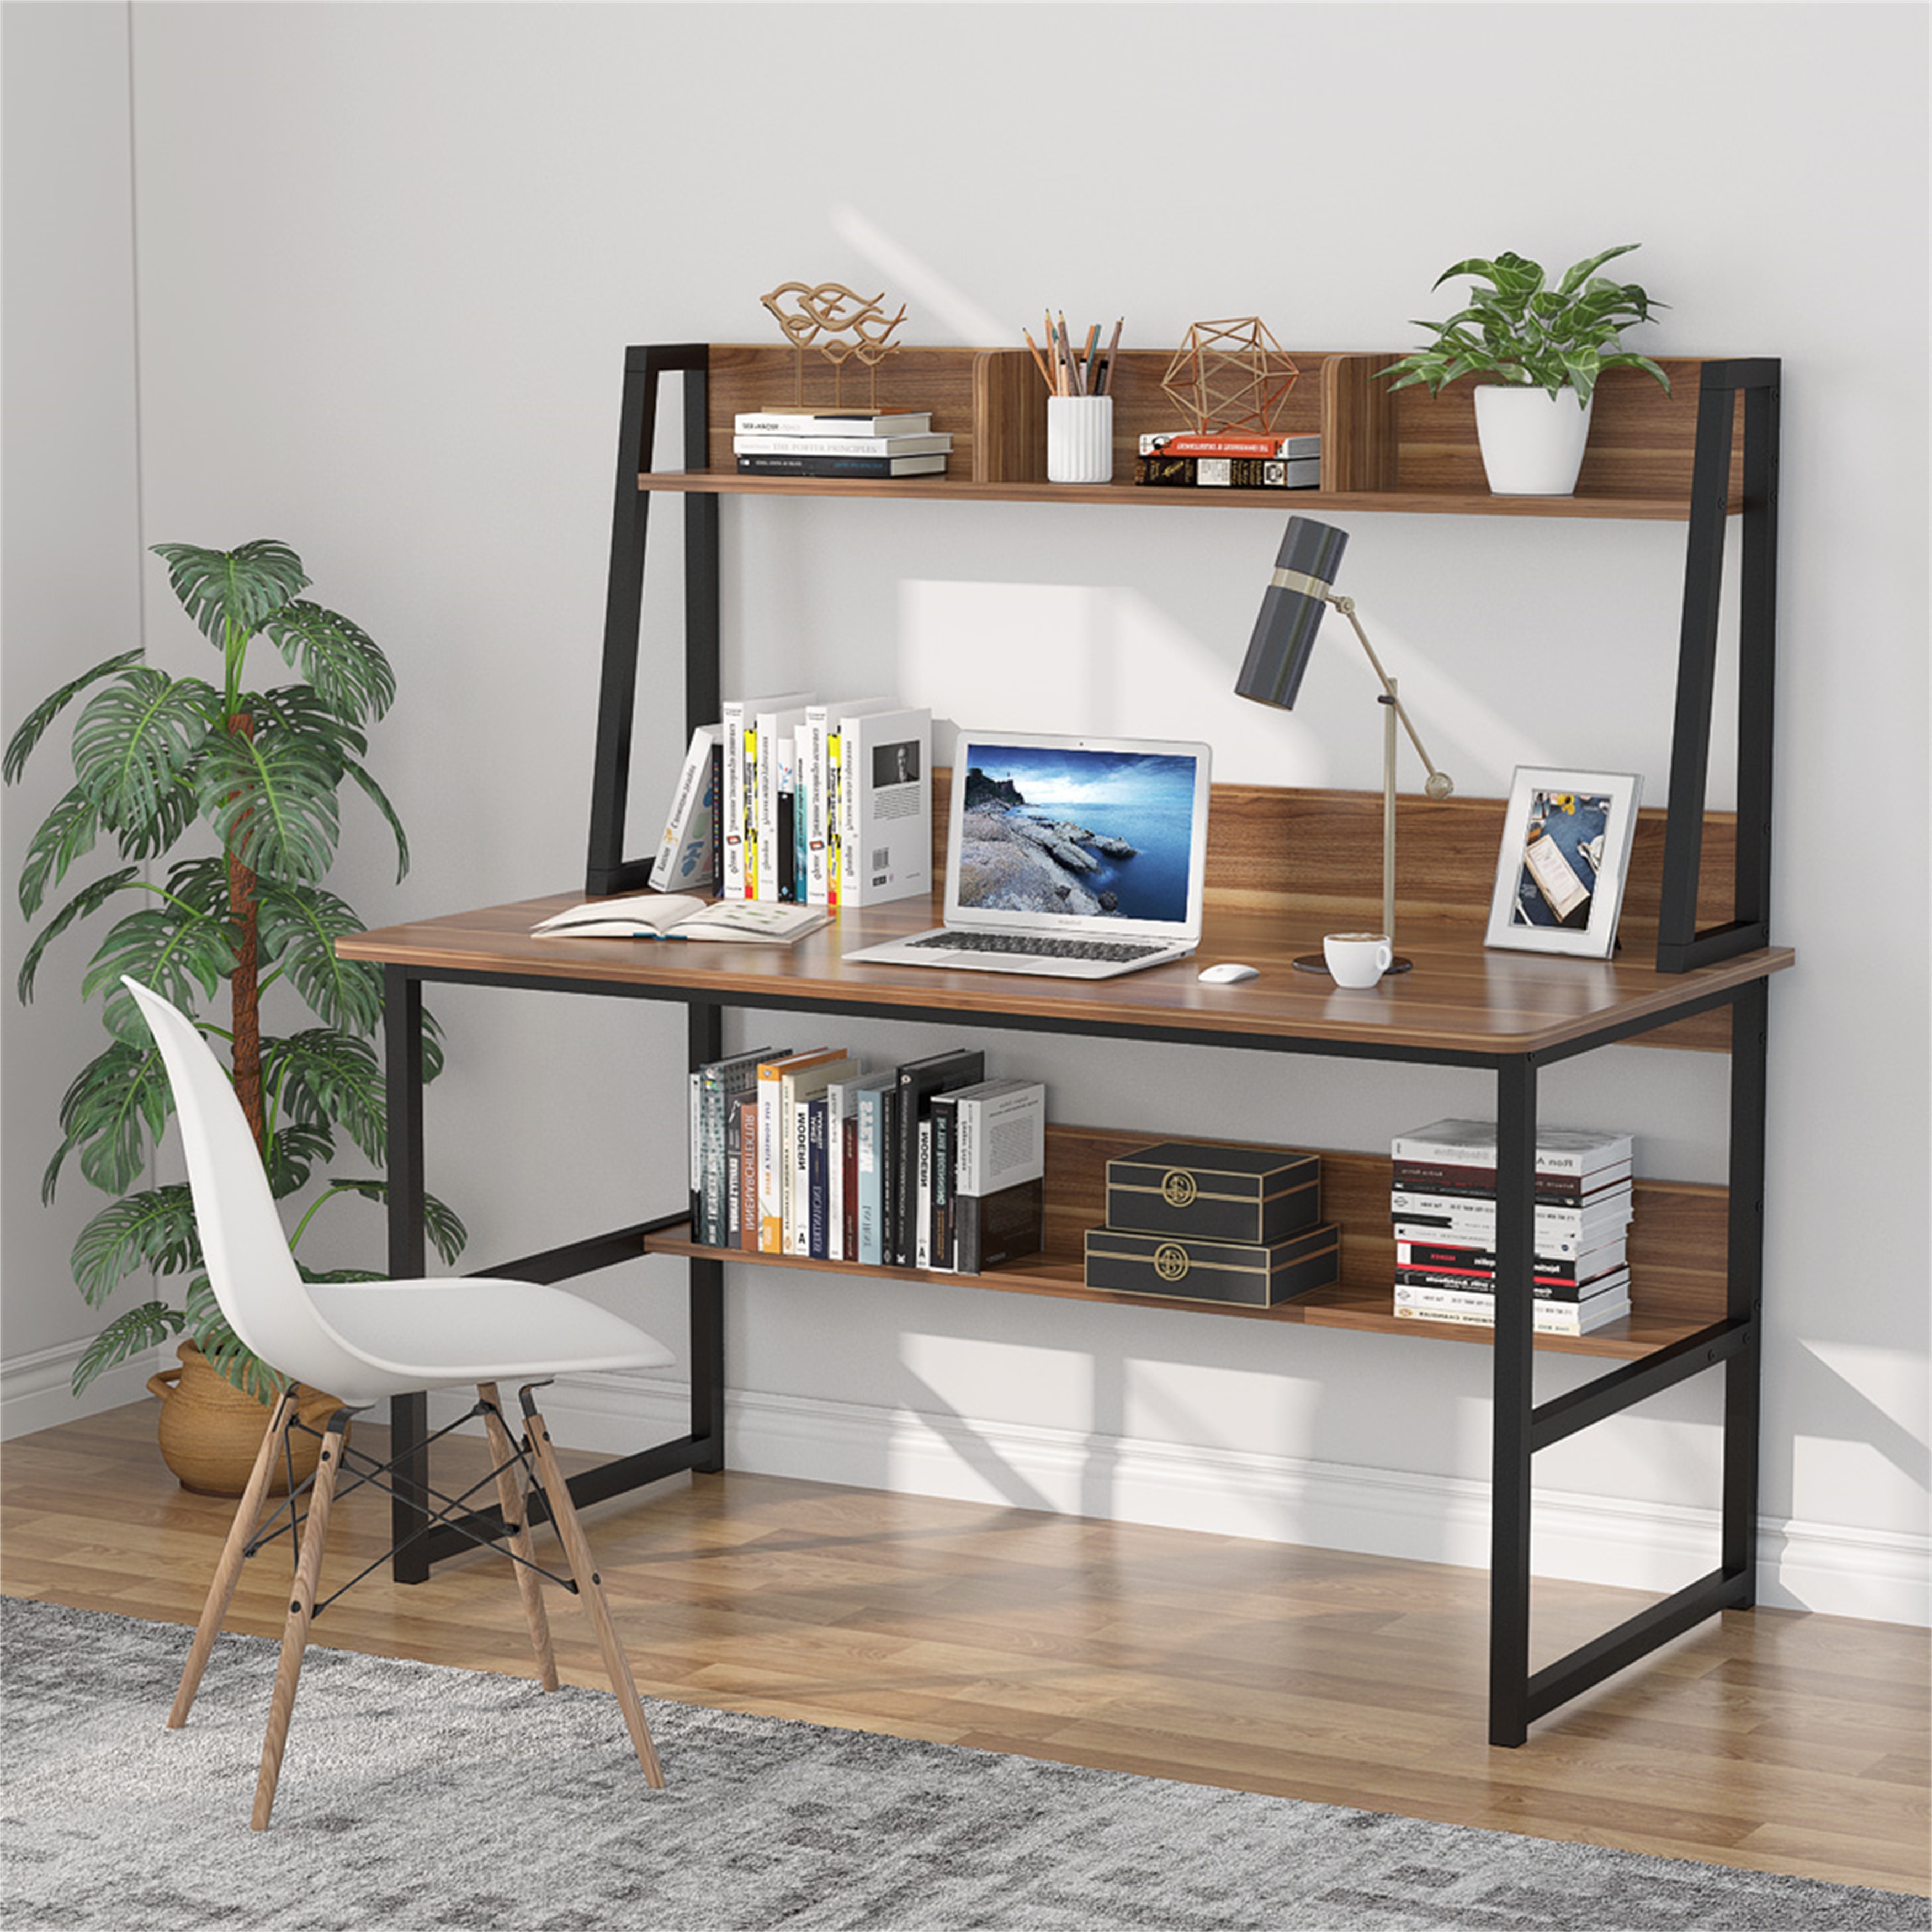 https://ak1.ostkcdn.com/images/products/is/images/direct/4217ba09c93c516934ae5bd3e335c0cb41ee22be/47-Inches%C2%A0Computer-Desk-with-Hutch-and-Bookshelf%2C-Home-Office-Desk.jpg